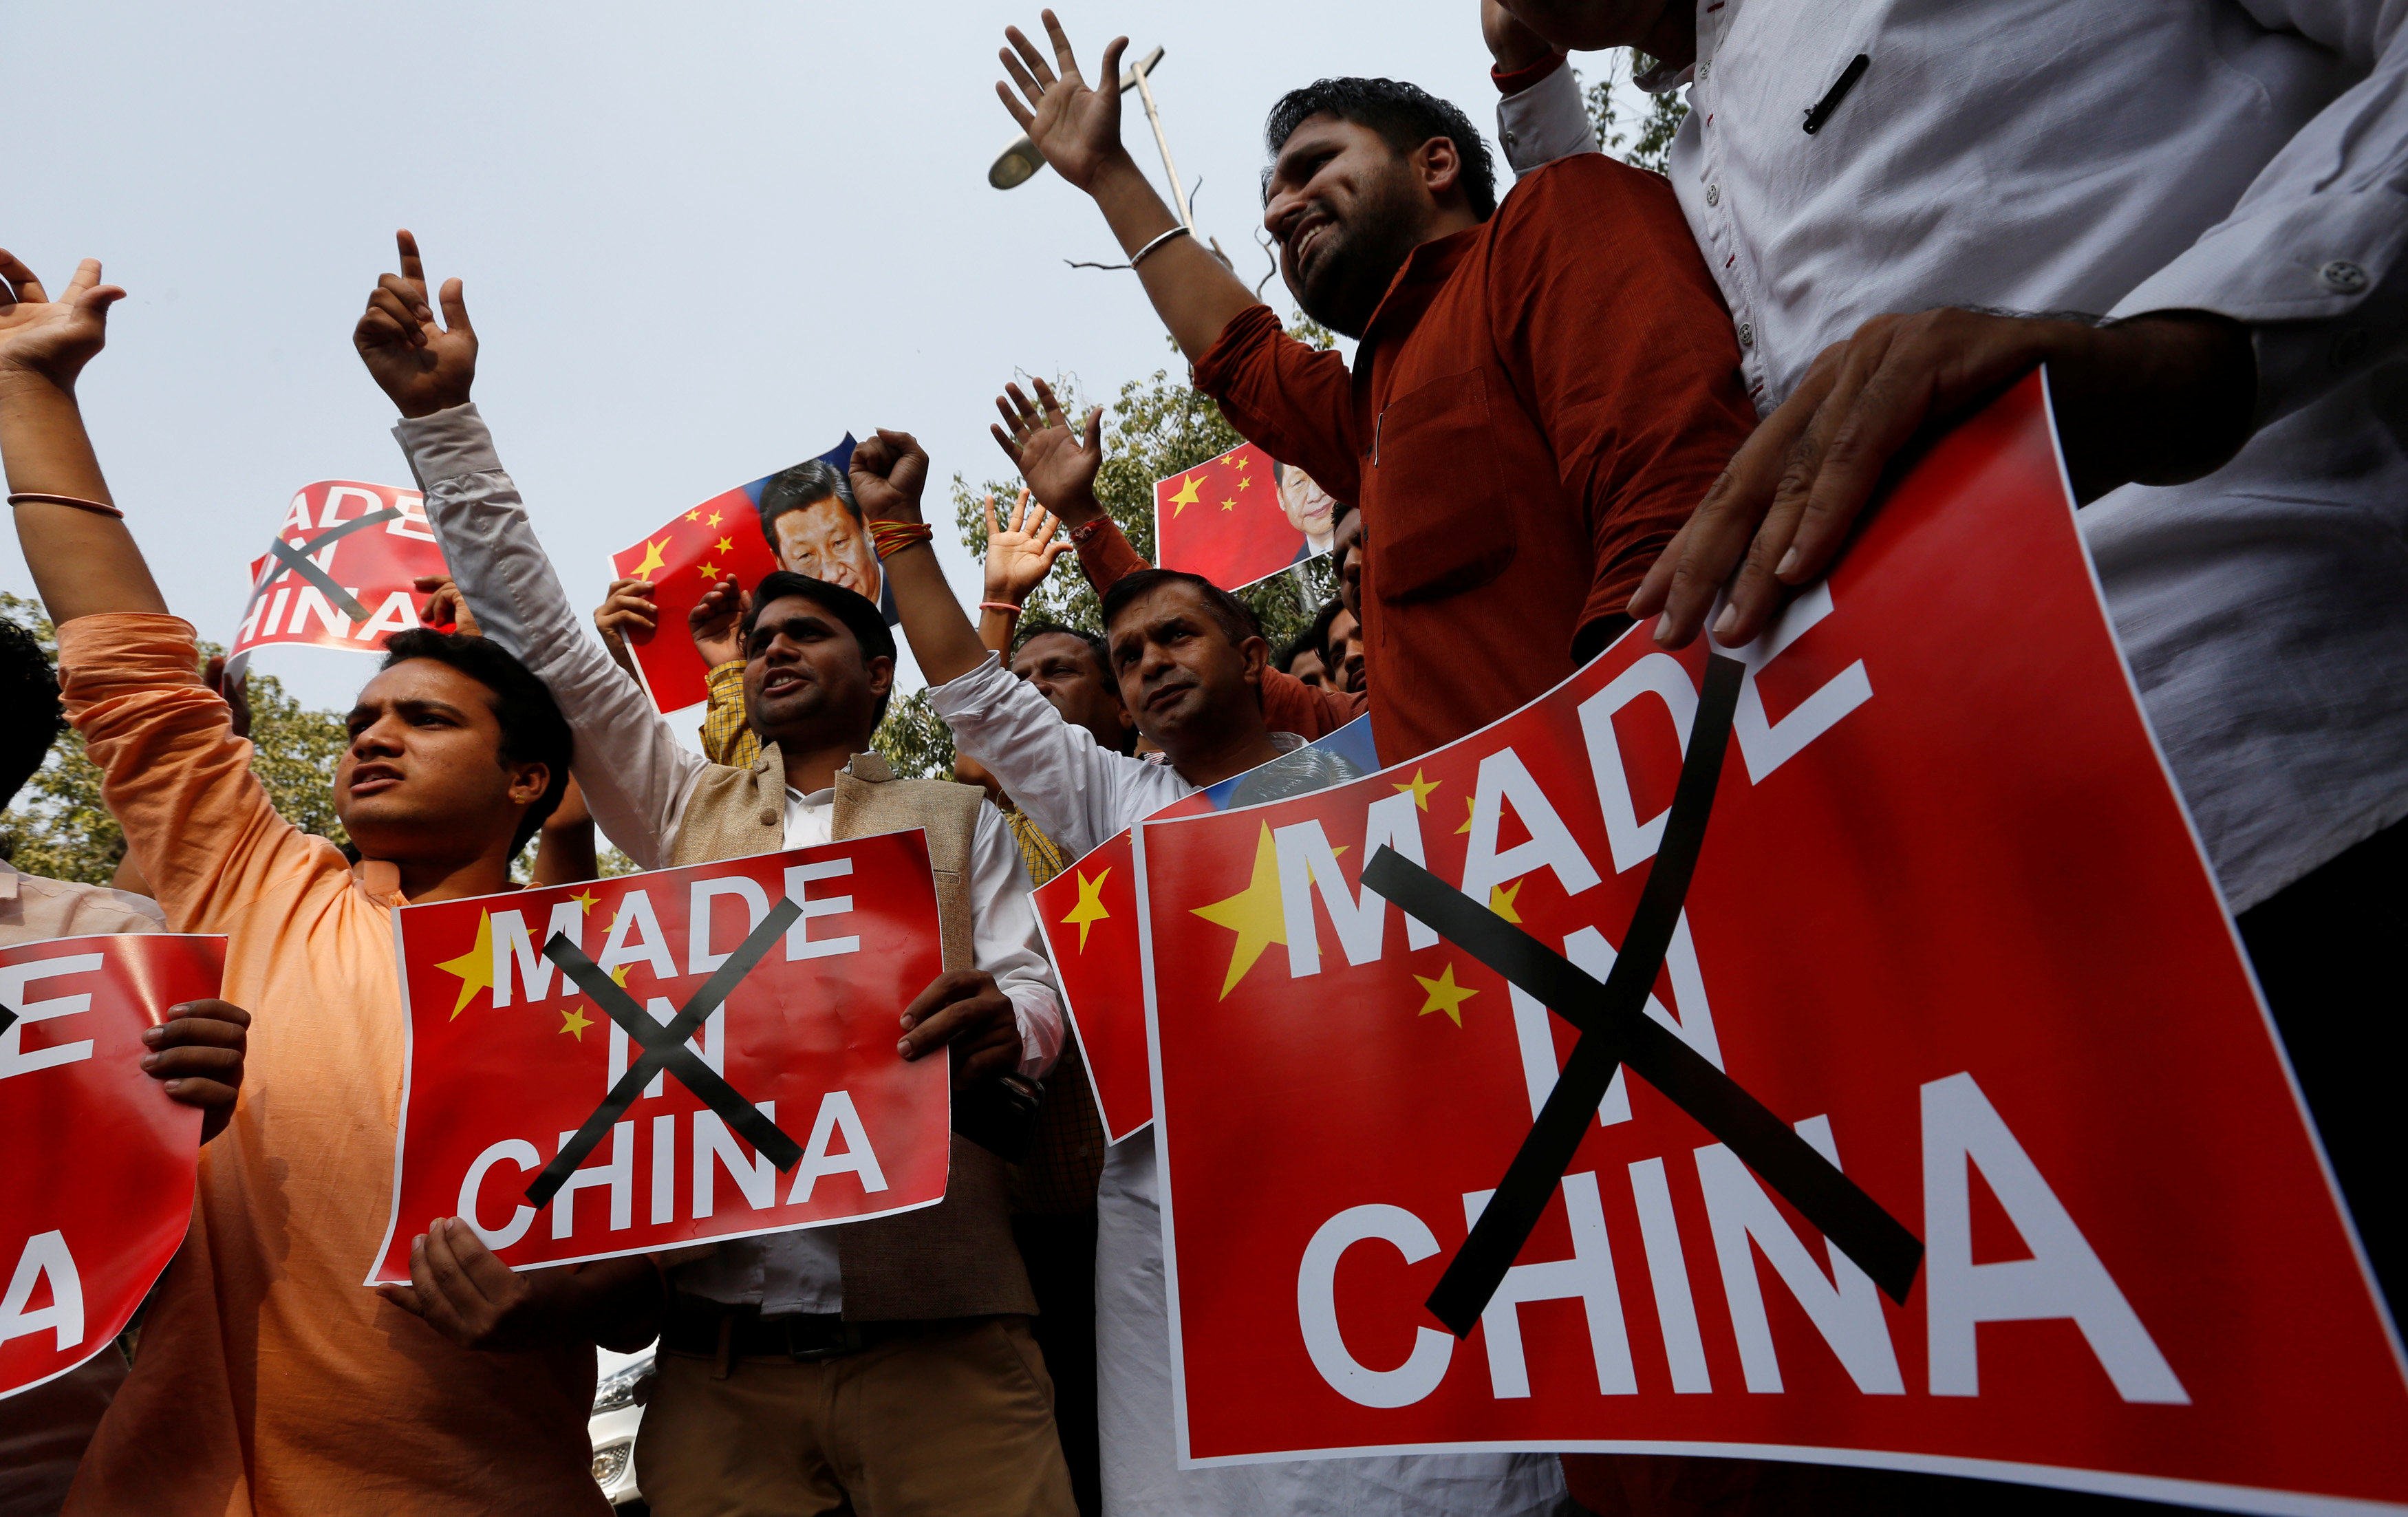 Hindu nationalist protesters shout slogans in New Delhi as they demand a boycott of Chinese products in 2016. A new study has found that Chinese imports play a crucial role in India’s economy. Photo: Reuters